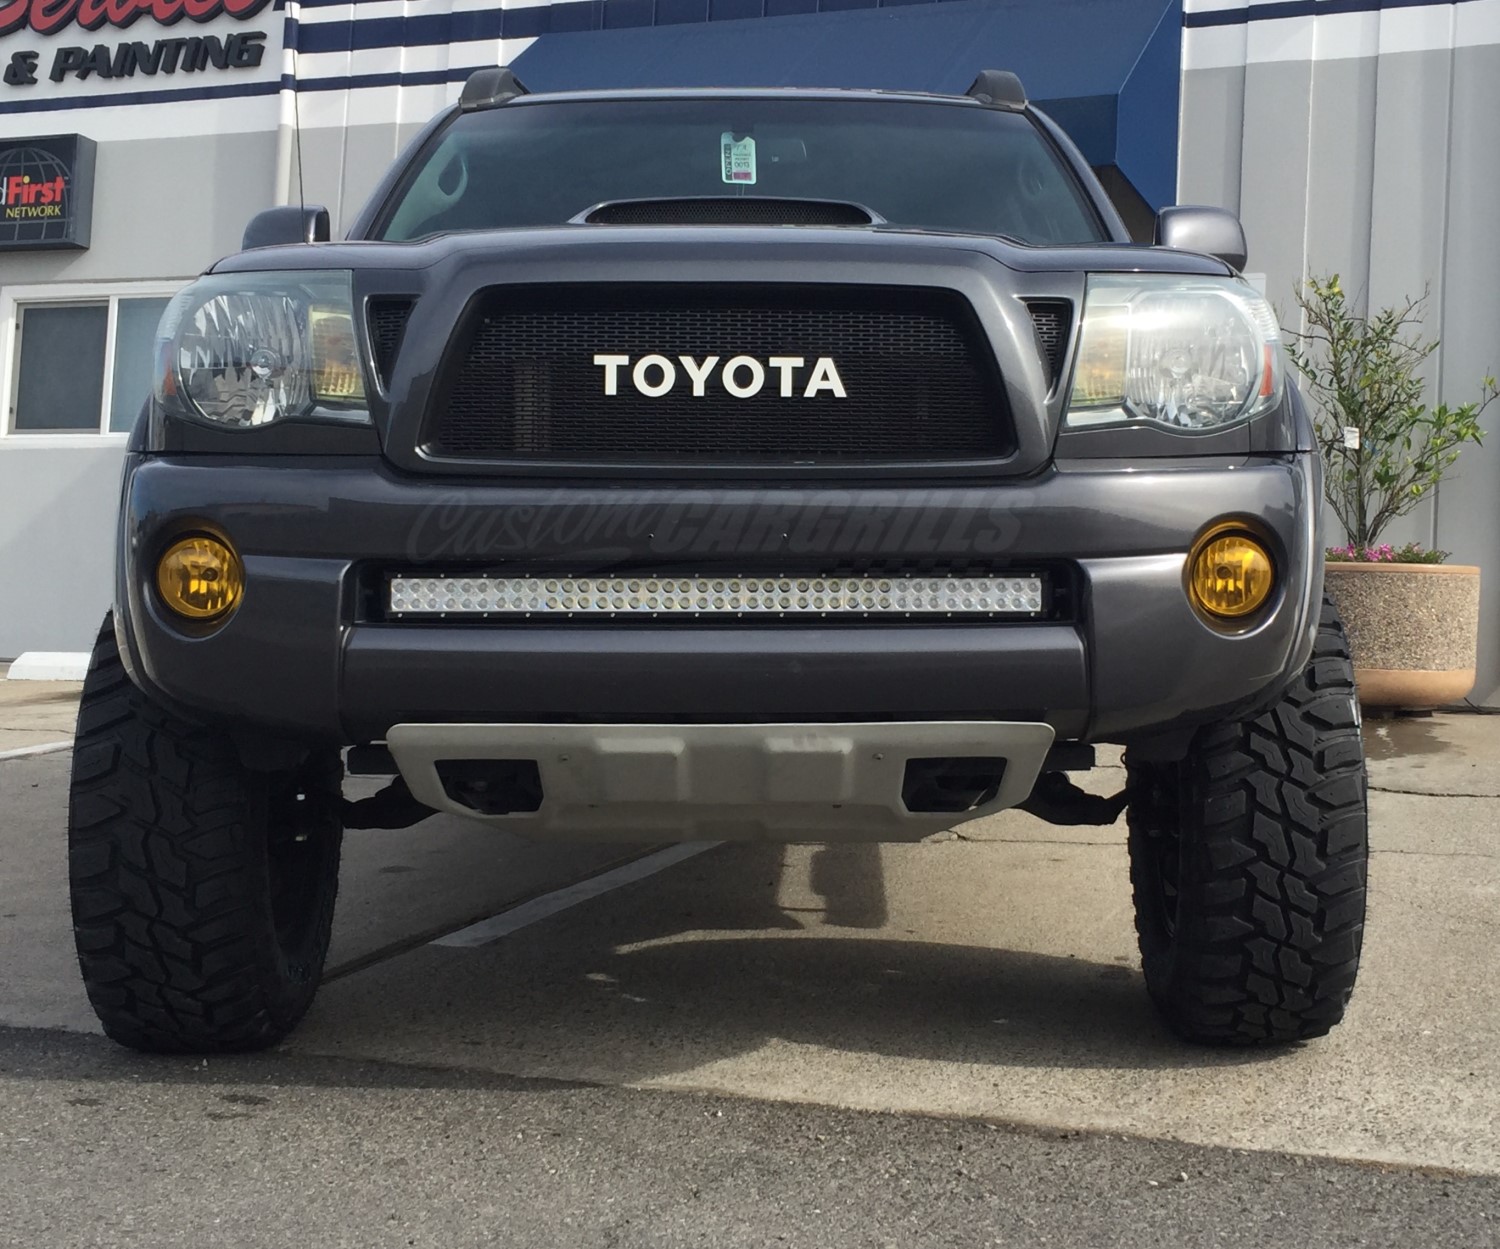 2005 - 2011 Toyota Tacoma Mesh Grill With Toyota Emblem #2